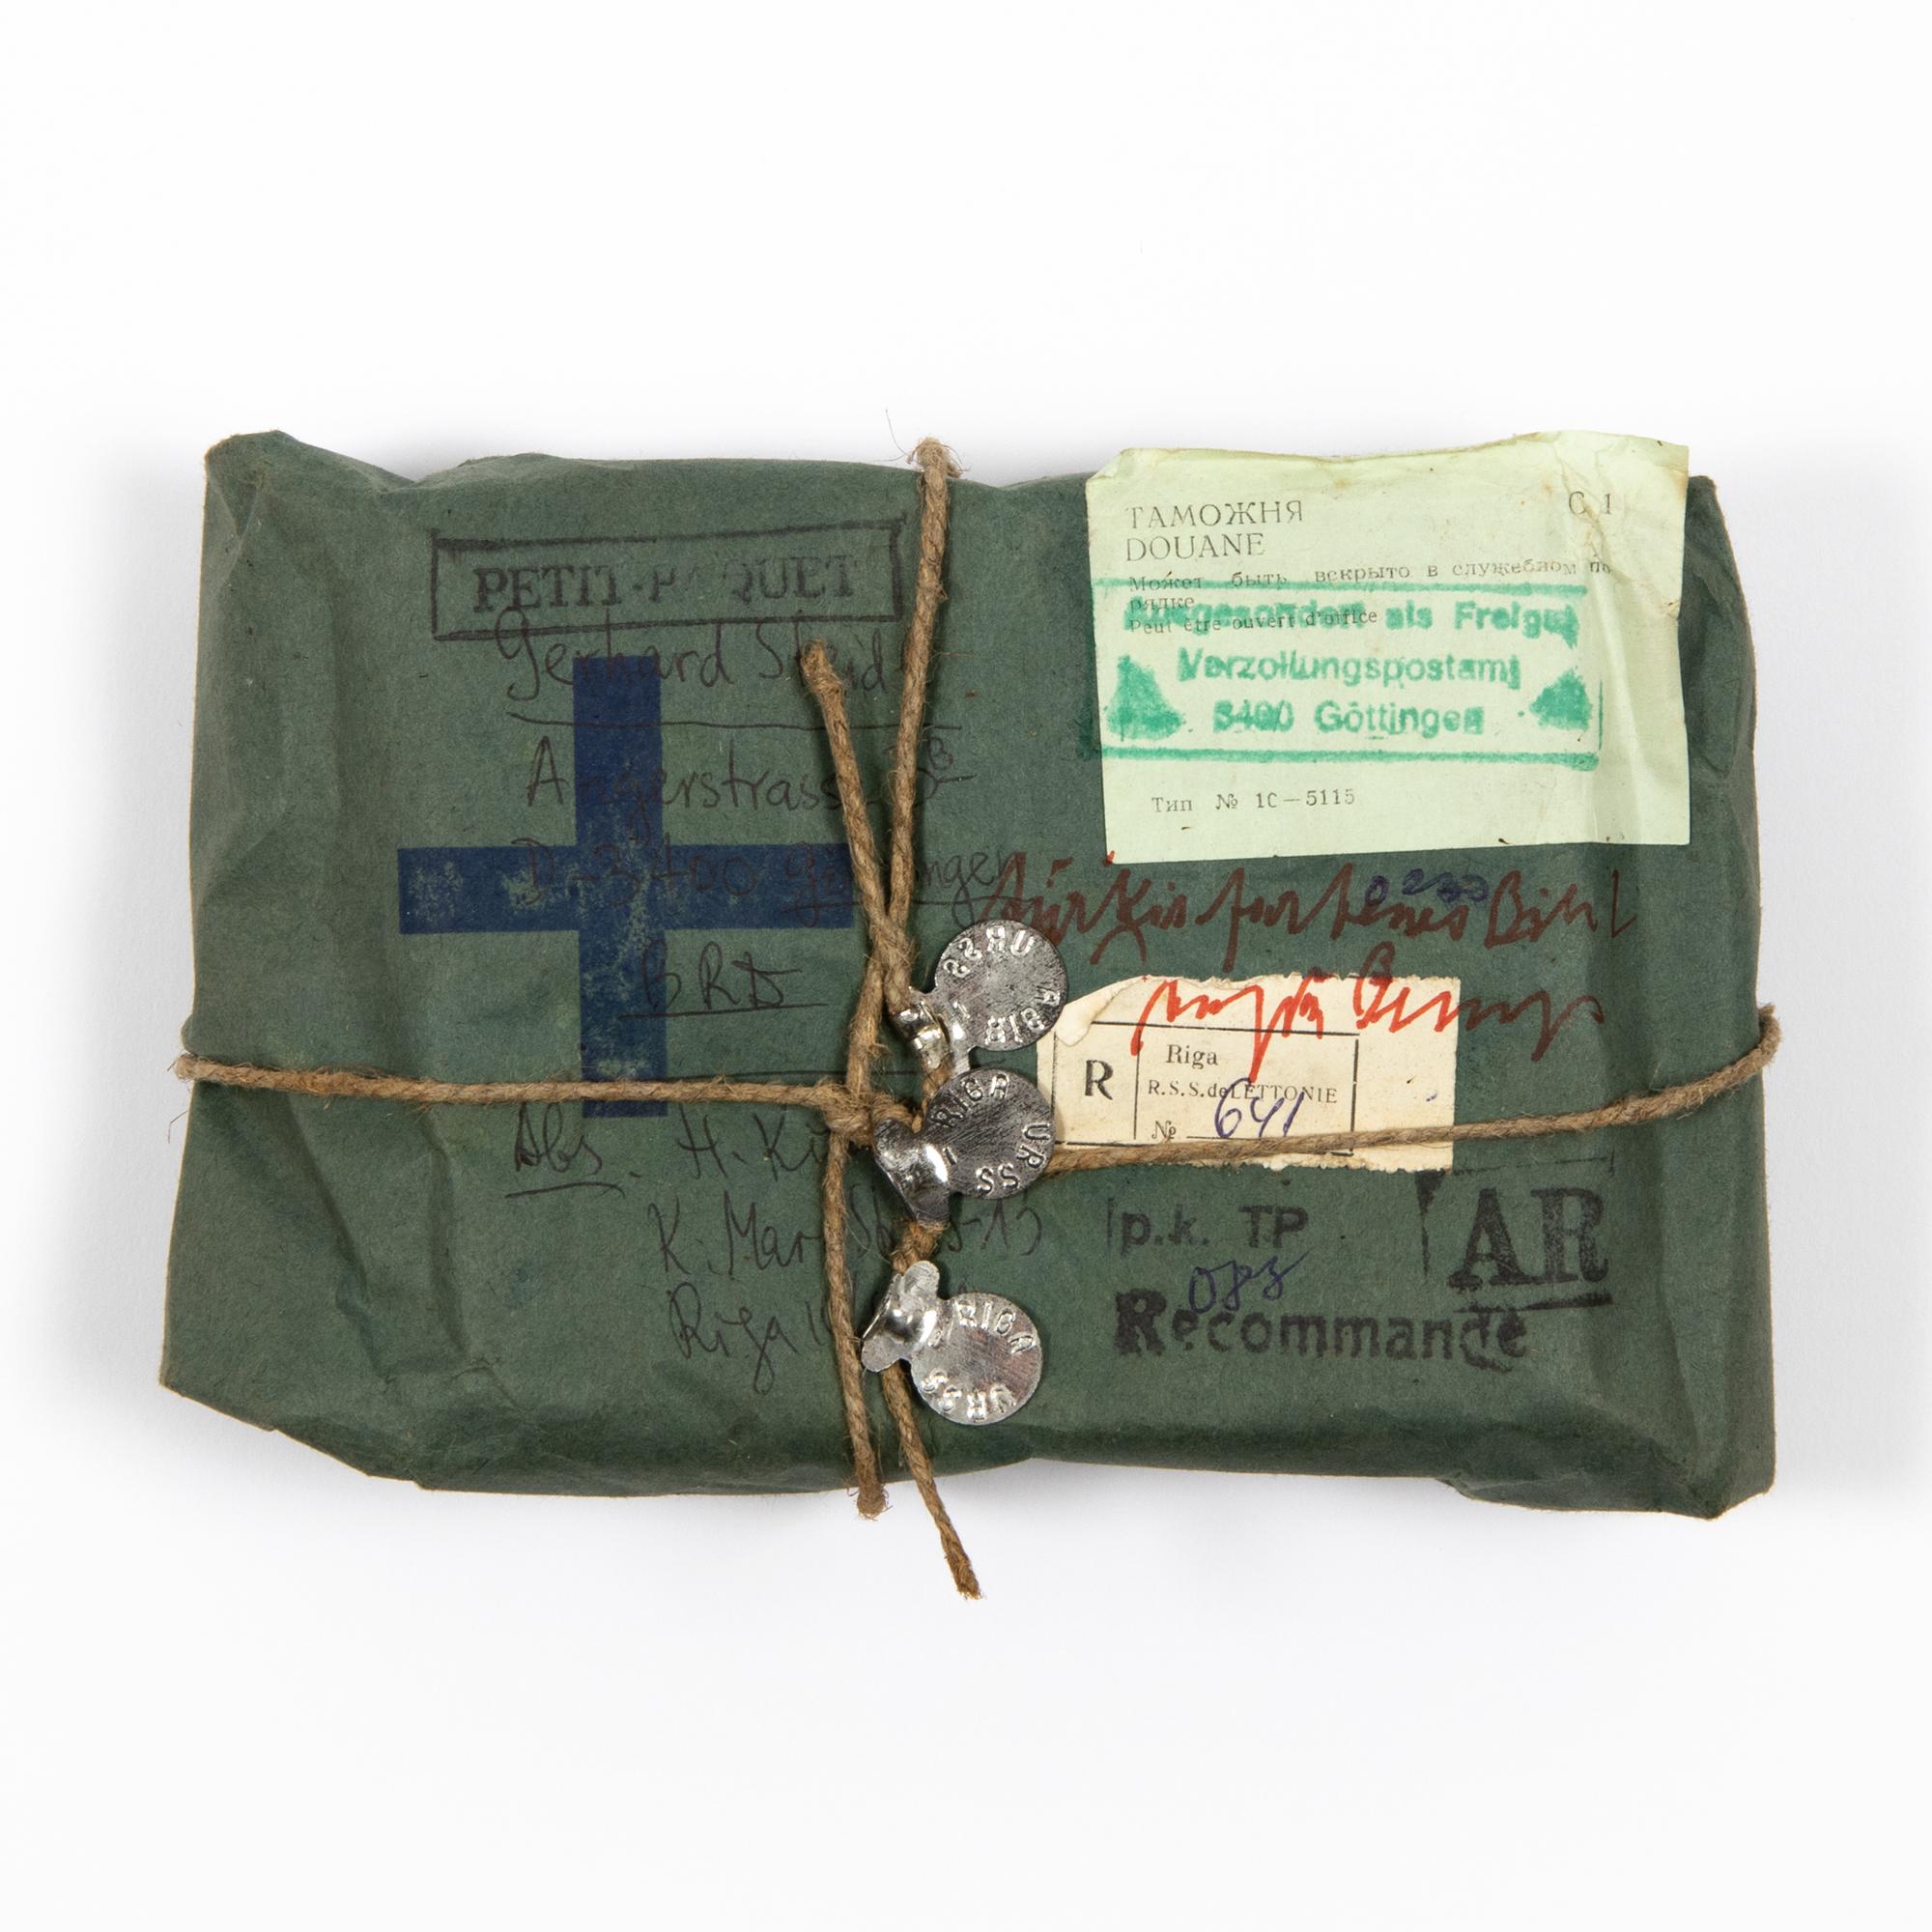 Joseph Beuys (German, 1921-1986)
Türkisfarbenes Bild, ca. 1974
Medium: Kraft paper, rope, pencil, ink, stamps, stickers and metal tags
Dimensions: 5 x 18.5 x 12.3 cm
Unique artwork: Hand-signed and titled
Condition: Very good